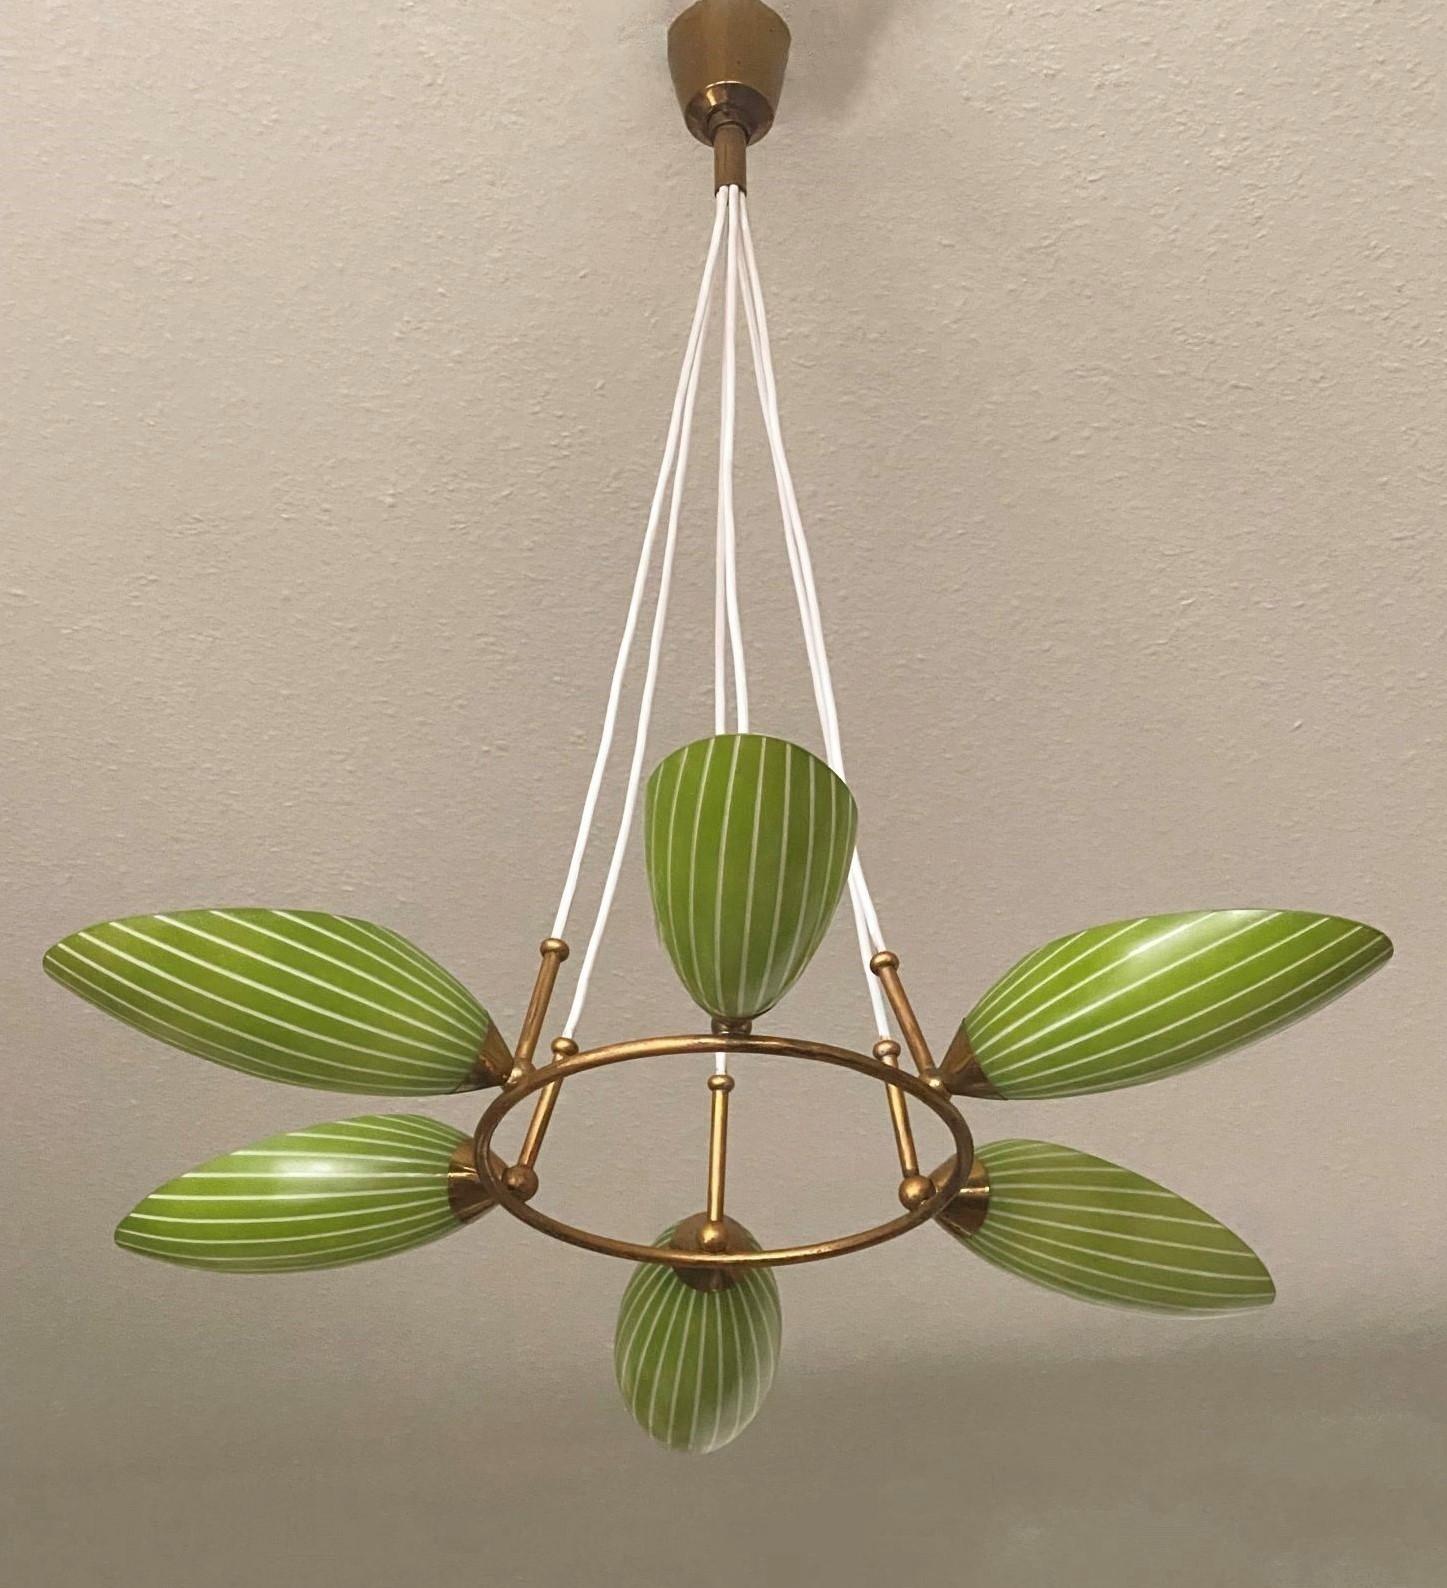 A rare Stilnovo brass and glass six-light chandelier, Italy 1950s. Elegant design in Mid-Century style with green white striped glass orizontal tulips. This wonderful piece is is fine vintage condition, glass without damages, brass with some wear